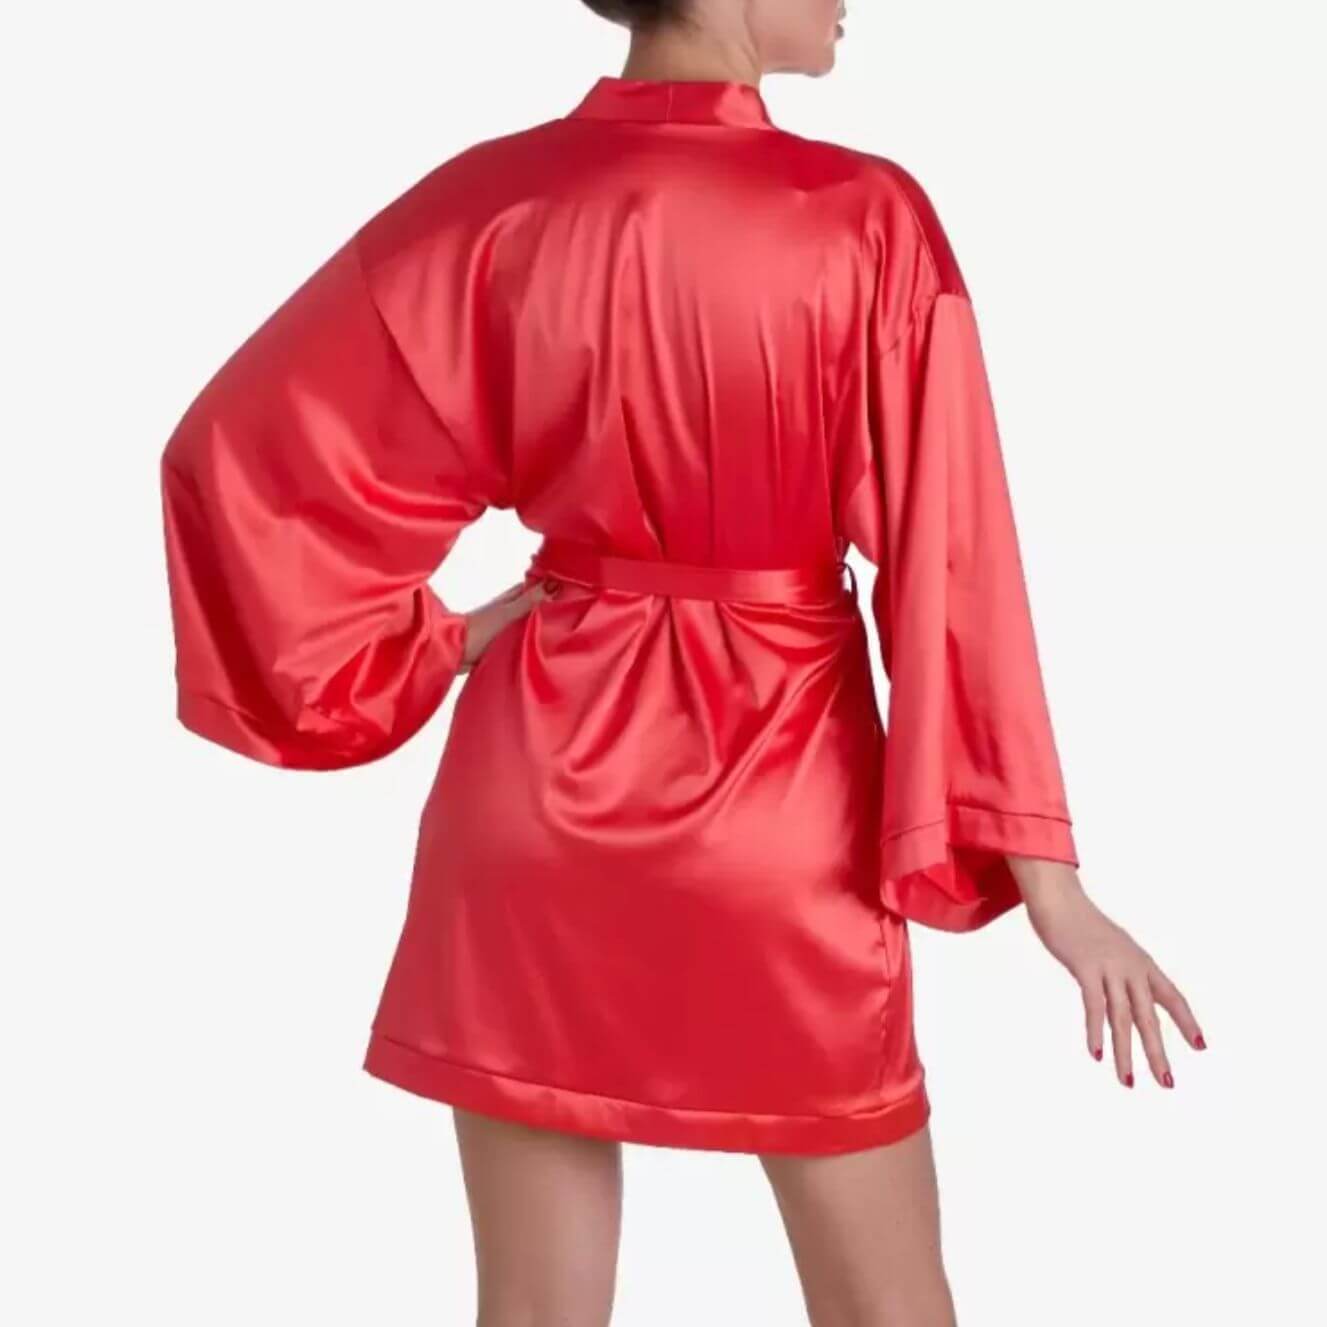 Ajour Gelato Satin Kimono Robe in Red KIM2A-Robes-Ajour-Red-XSmall/Small-Anna Bella Fine Lingerie, Reveal Your Most Gorgeous Self!